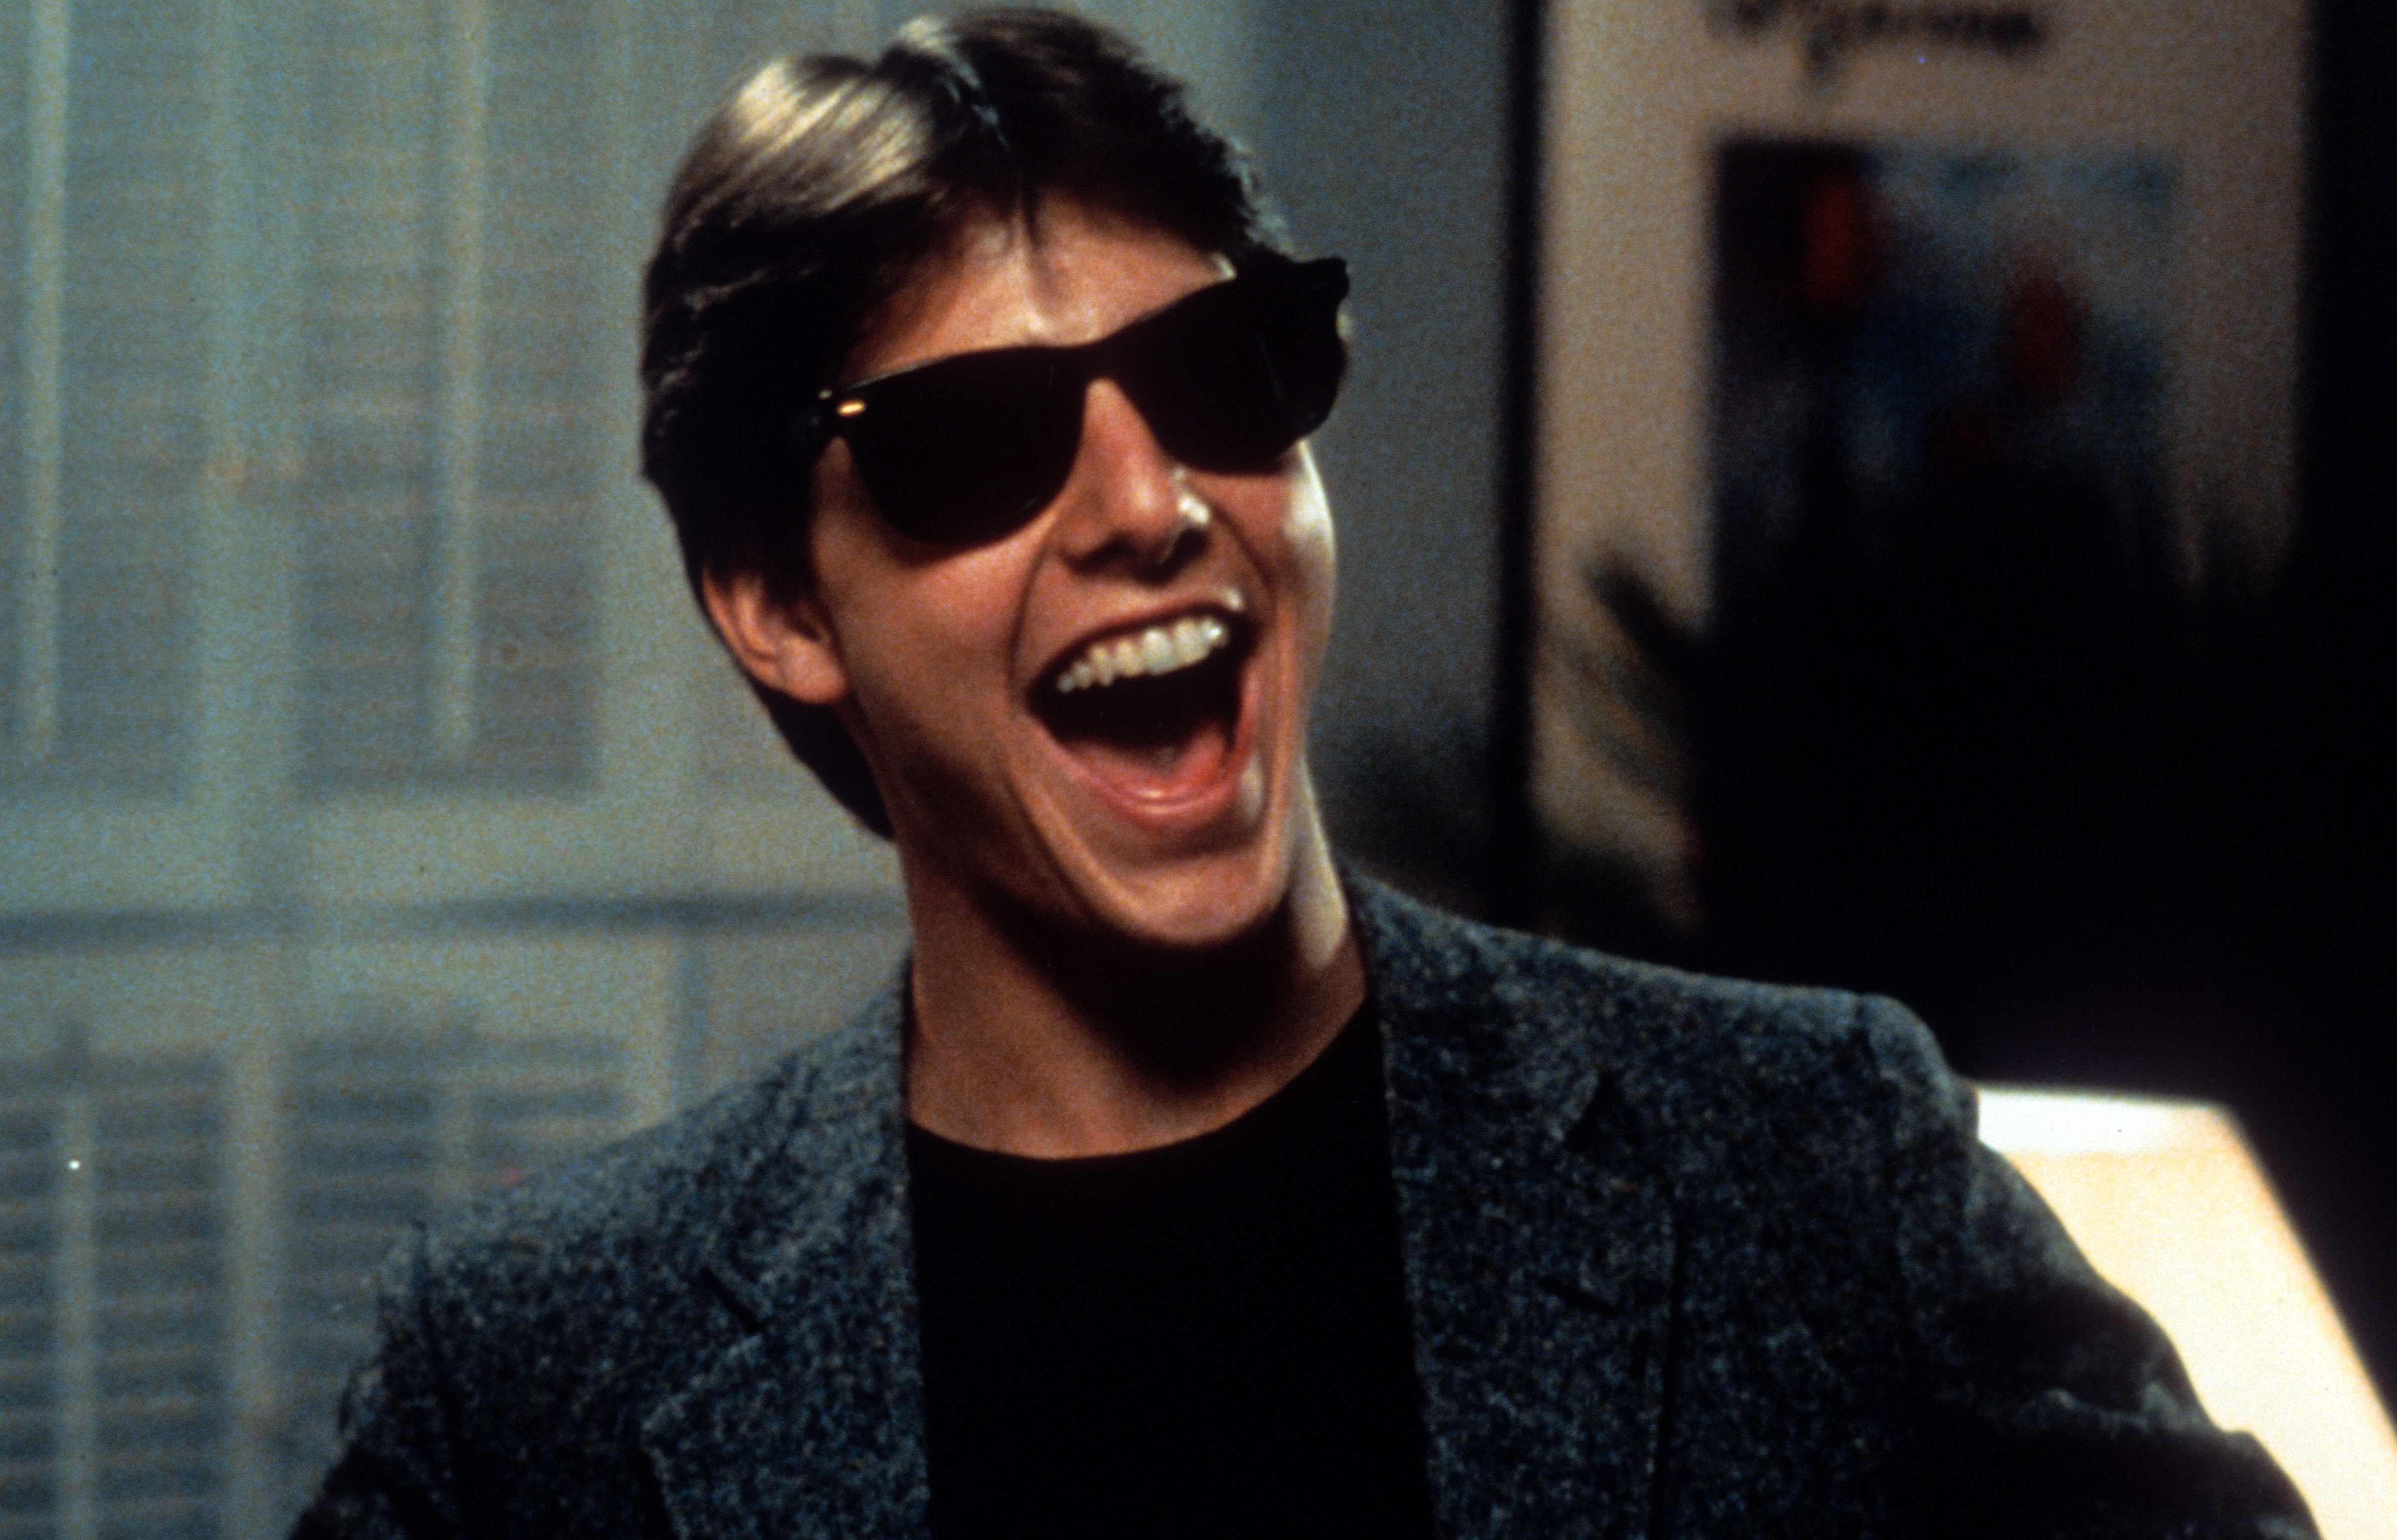 Tom Cruise in a scene from "Risky Business" in 1983 | Source: Getty Images